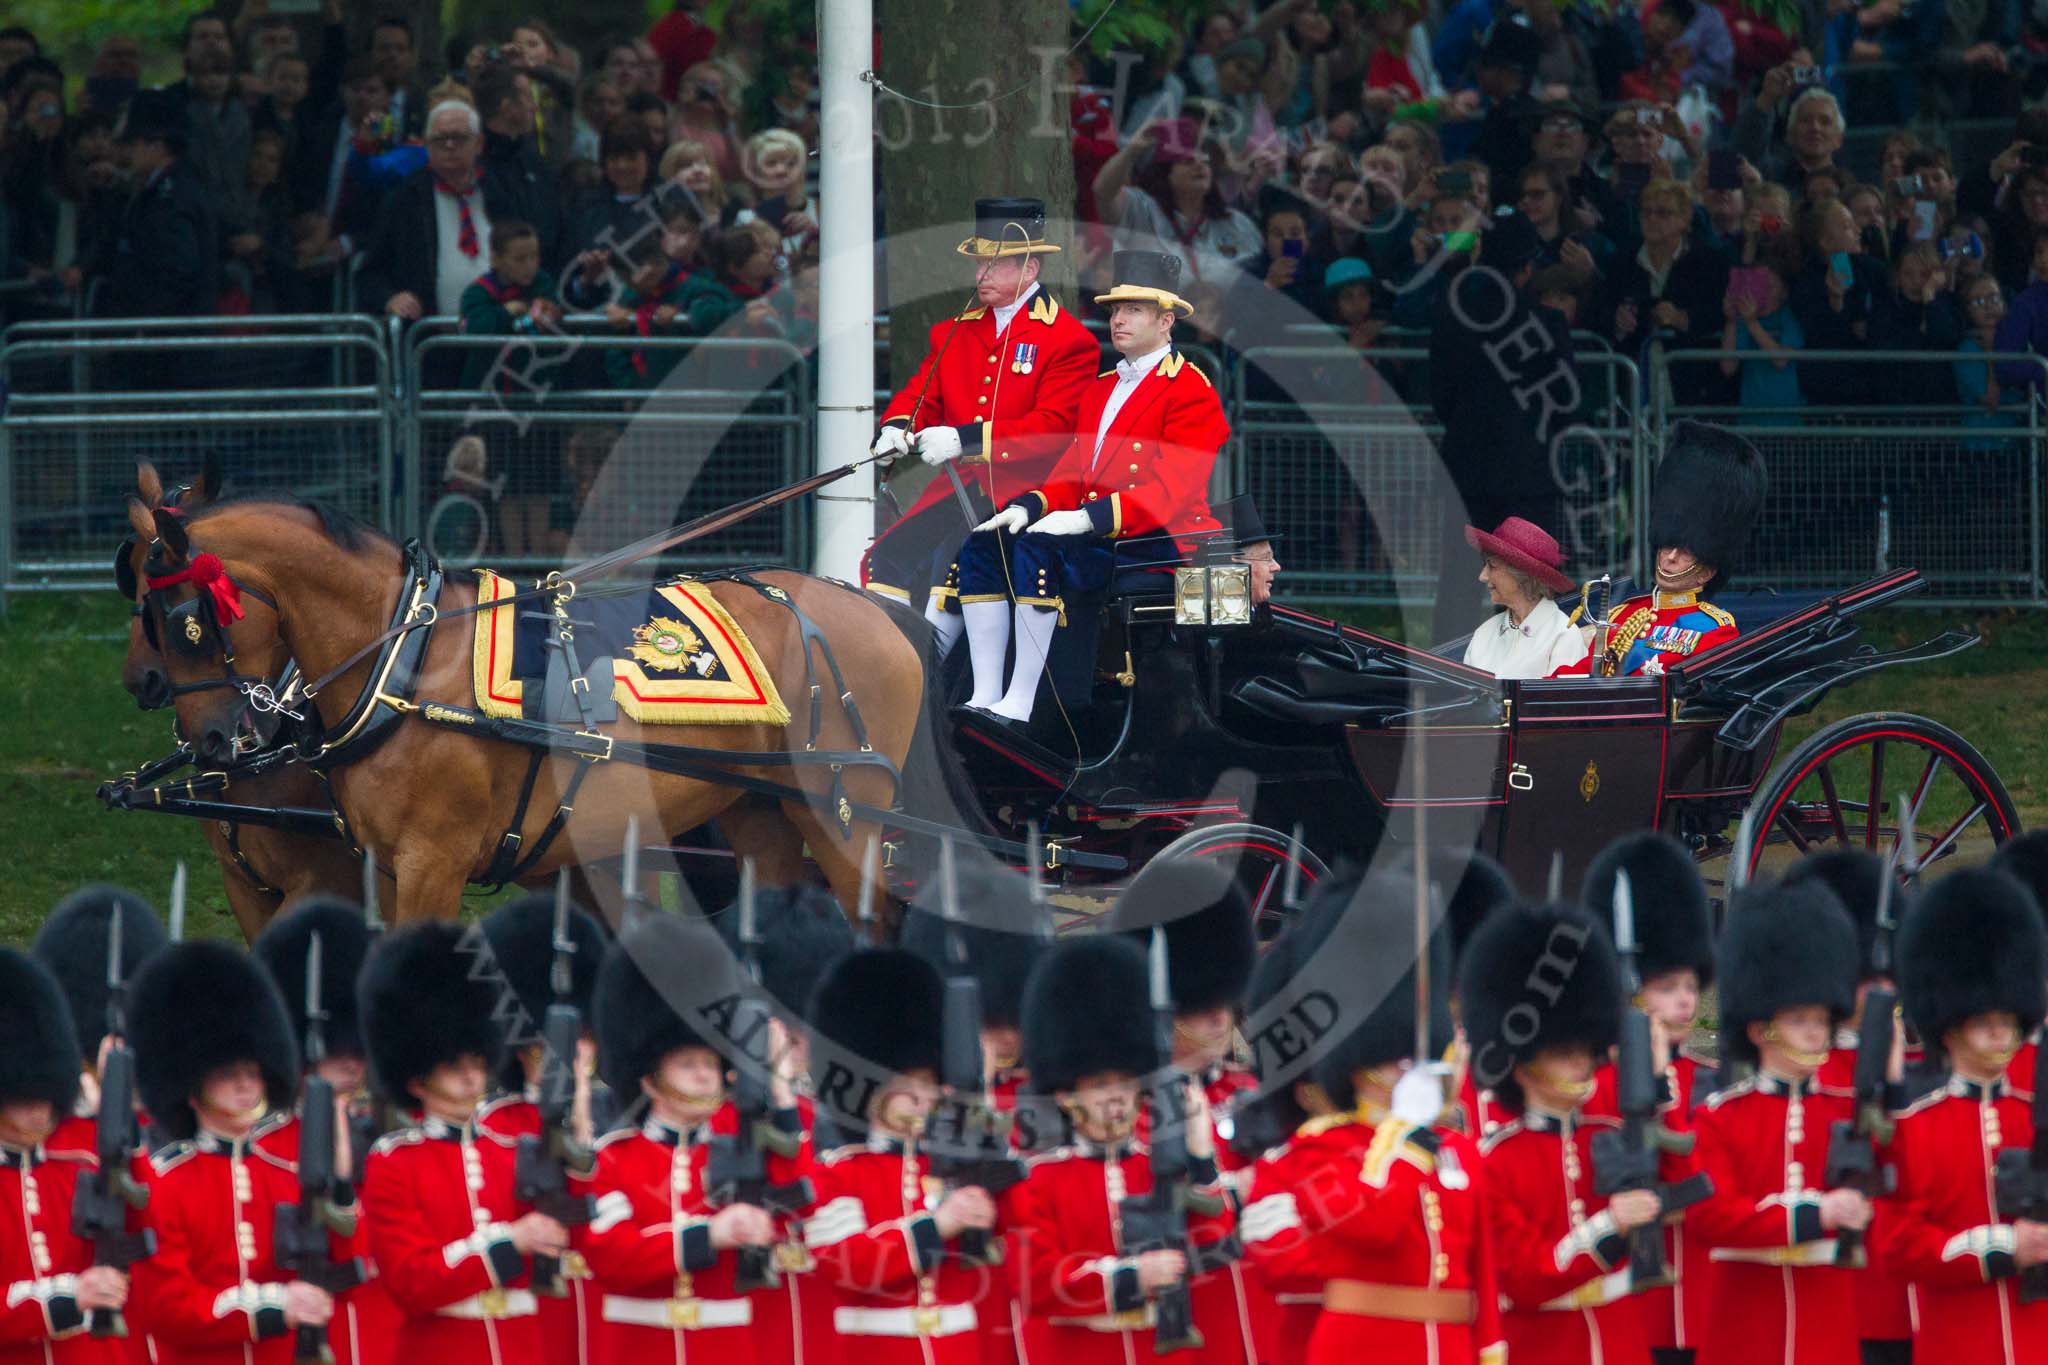 Trooping the Colour 2015. Image #178, 13 June 2015 10:50 Horse Guards Parade, London, UK